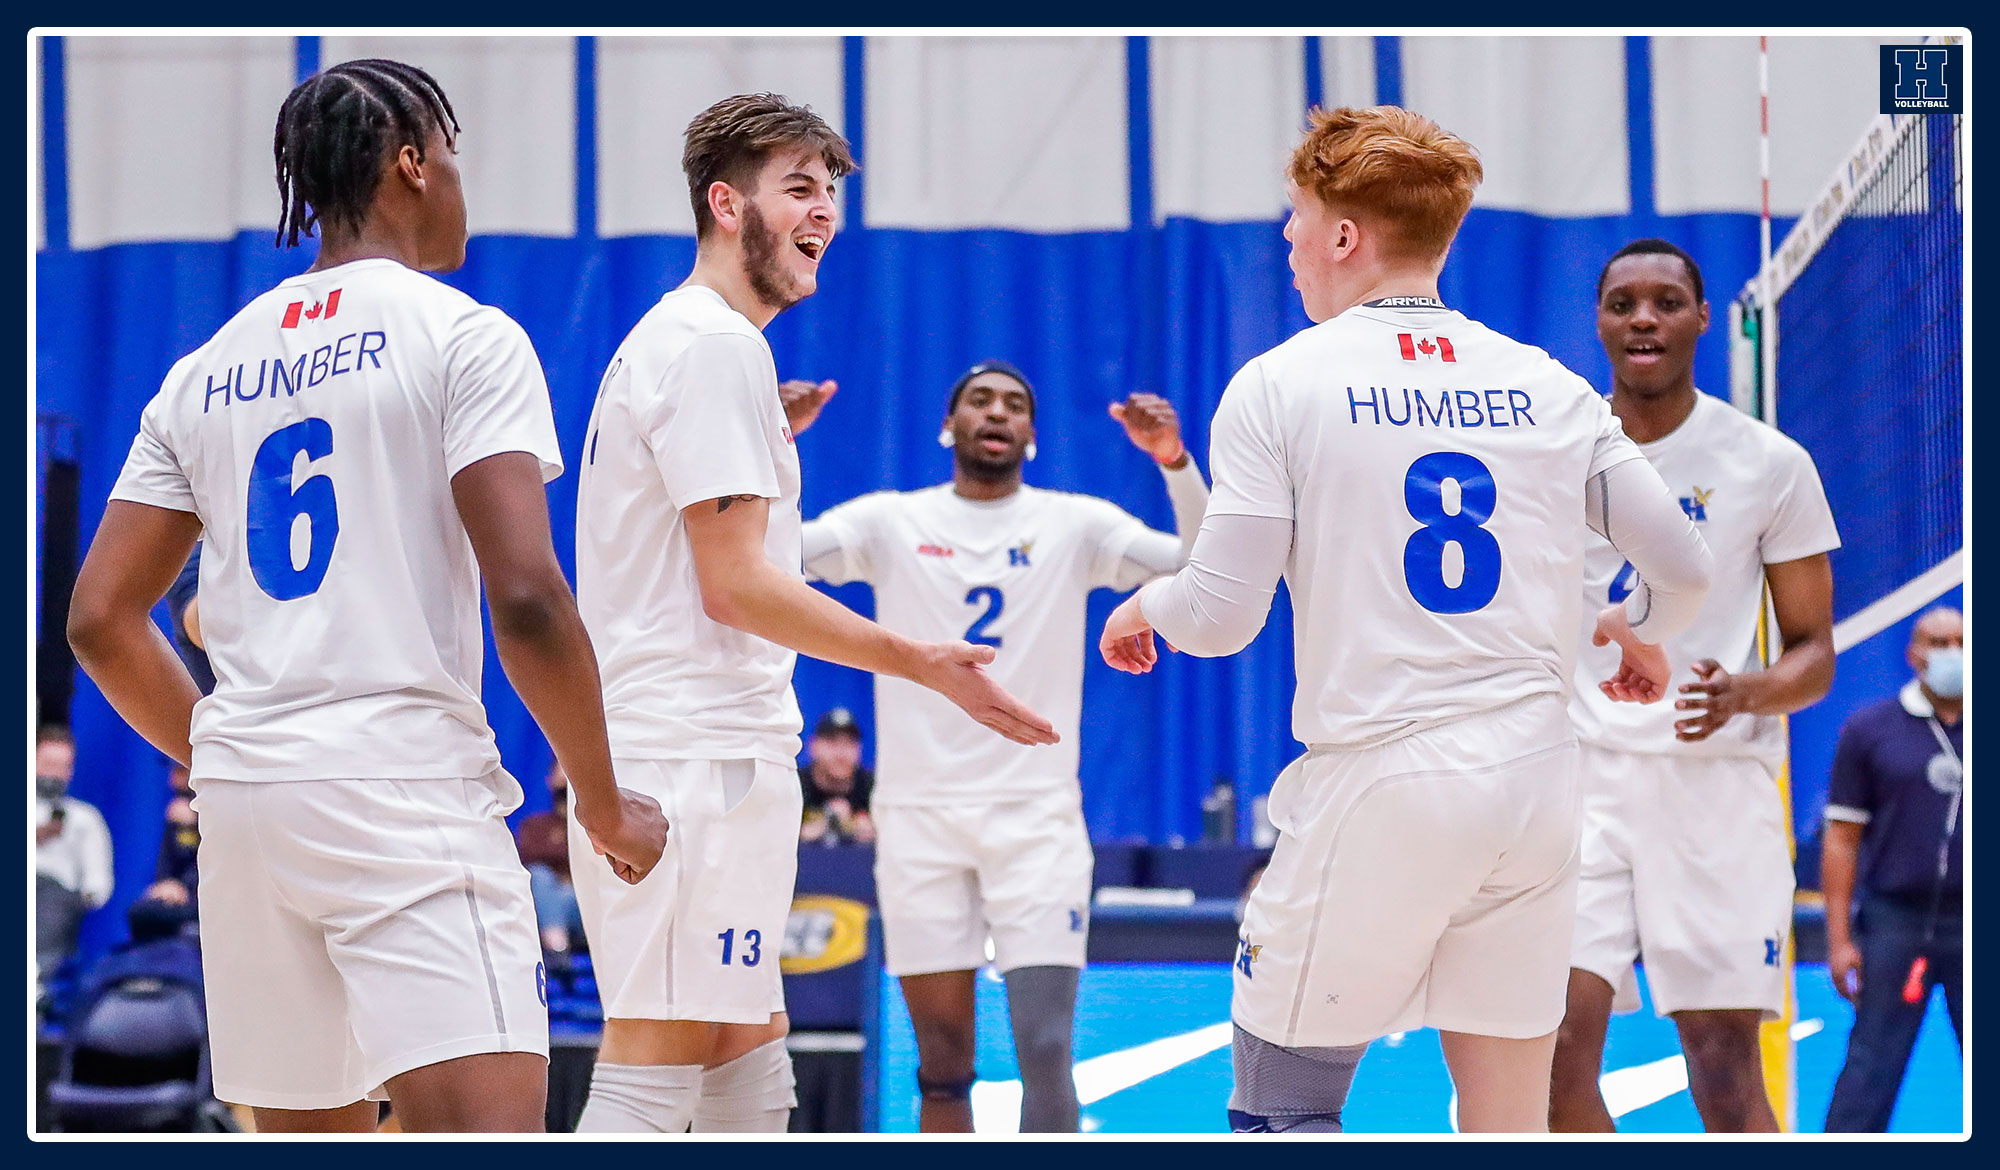 Men's volleyball celebrating a point.